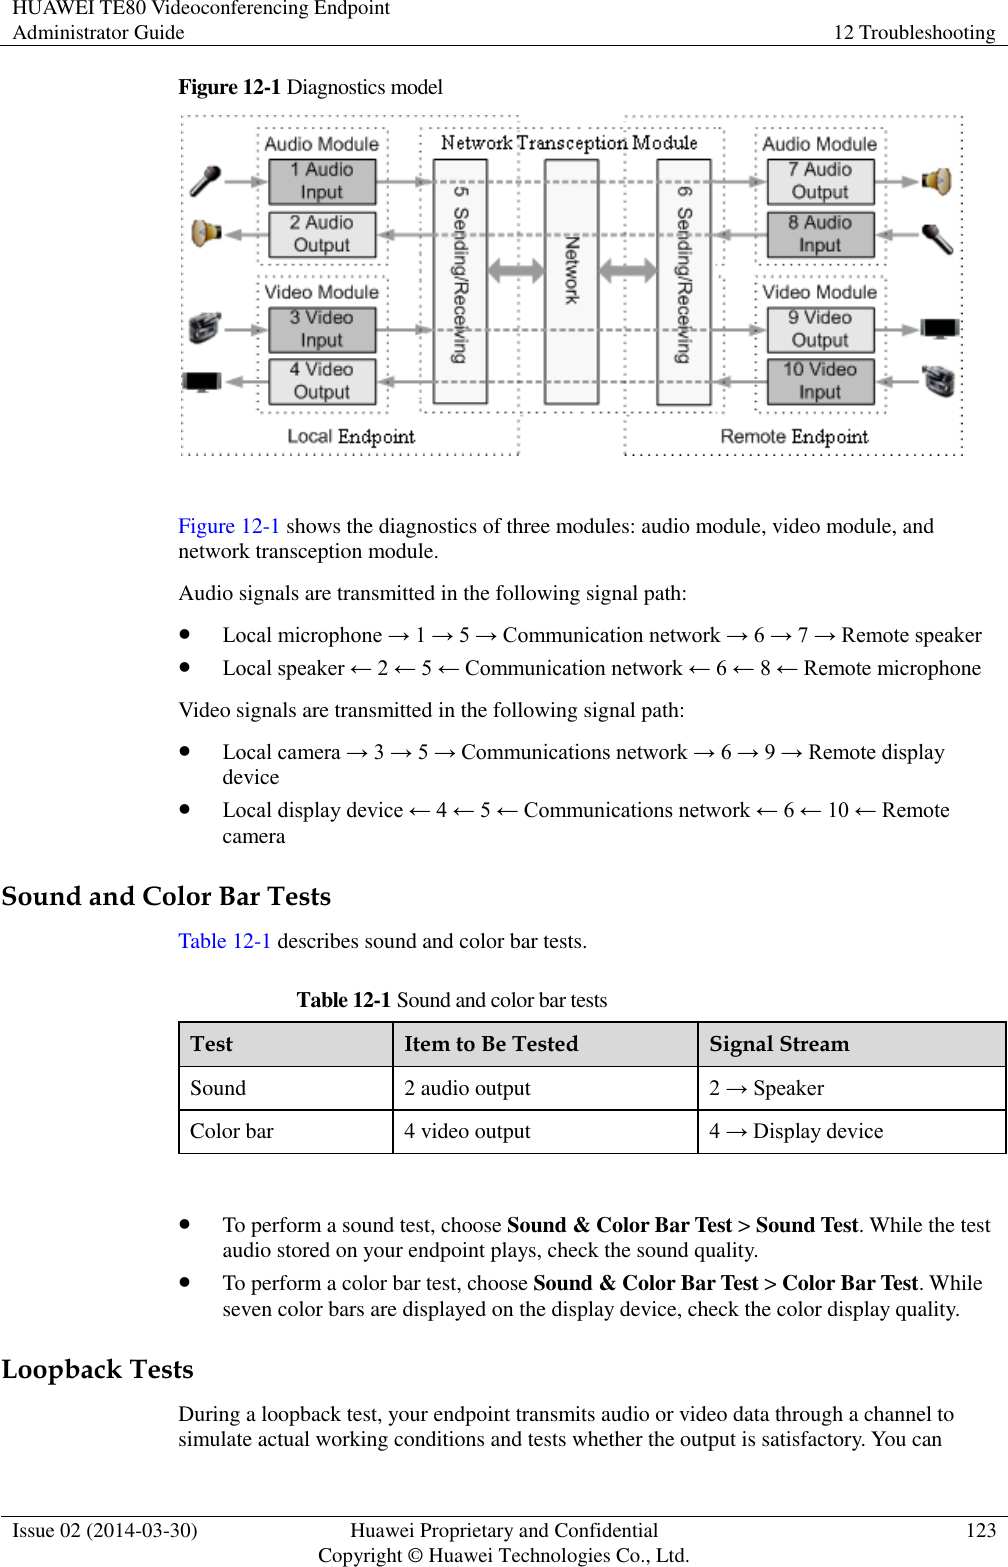 HUAWEI TE80 Videoconferencing Endpoint Administrator Guide 12 Troubleshooting  Issue 02 (2014-03-30) Huawei Proprietary and Confidential Copyright © Huawei Technologies Co., Ltd. 123  Figure 12-1 Diagnostics model   Figure 12-1 shows the diagnostics of three modules: audio module, video module, and network transception module. Audio signals are transmitted in the following signal path:  Local microphone → 1 → 5 → Communication network → 6 → 7 → Remote speaker  Local speaker ← 2 ← 5 ← Communication network ← 6 ← 8 ← Remote microphone Video signals are transmitted in the following signal path:  Local camera → 3 → 5 → Communications network → 6 → 9 → Remote display device  Local display device ← 4 ← 5 ← Communications network ← 6 ← 10 ← Remote camera Sound and Color Bar Tests Table 12-1 describes sound and color bar tests. Table 12-1 Sound and color bar tests Test Item to Be Tested Signal Stream Sound 2 audio output 2 → Speaker Color bar 4 video output 4 → Display device   To perform a sound test, choose Sound &amp; Color Bar Test &gt; Sound Test. While the test audio stored on your endpoint plays, check the sound quality.  To perform a color bar test, choose Sound &amp; Color Bar Test &gt; Color Bar Test. While seven color bars are displayed on the display device, check the color display quality. Loopback Tests During a loopback test, your endpoint transmits audio or video data through a channel to simulate actual working conditions and tests whether the output is satisfactory. You can 